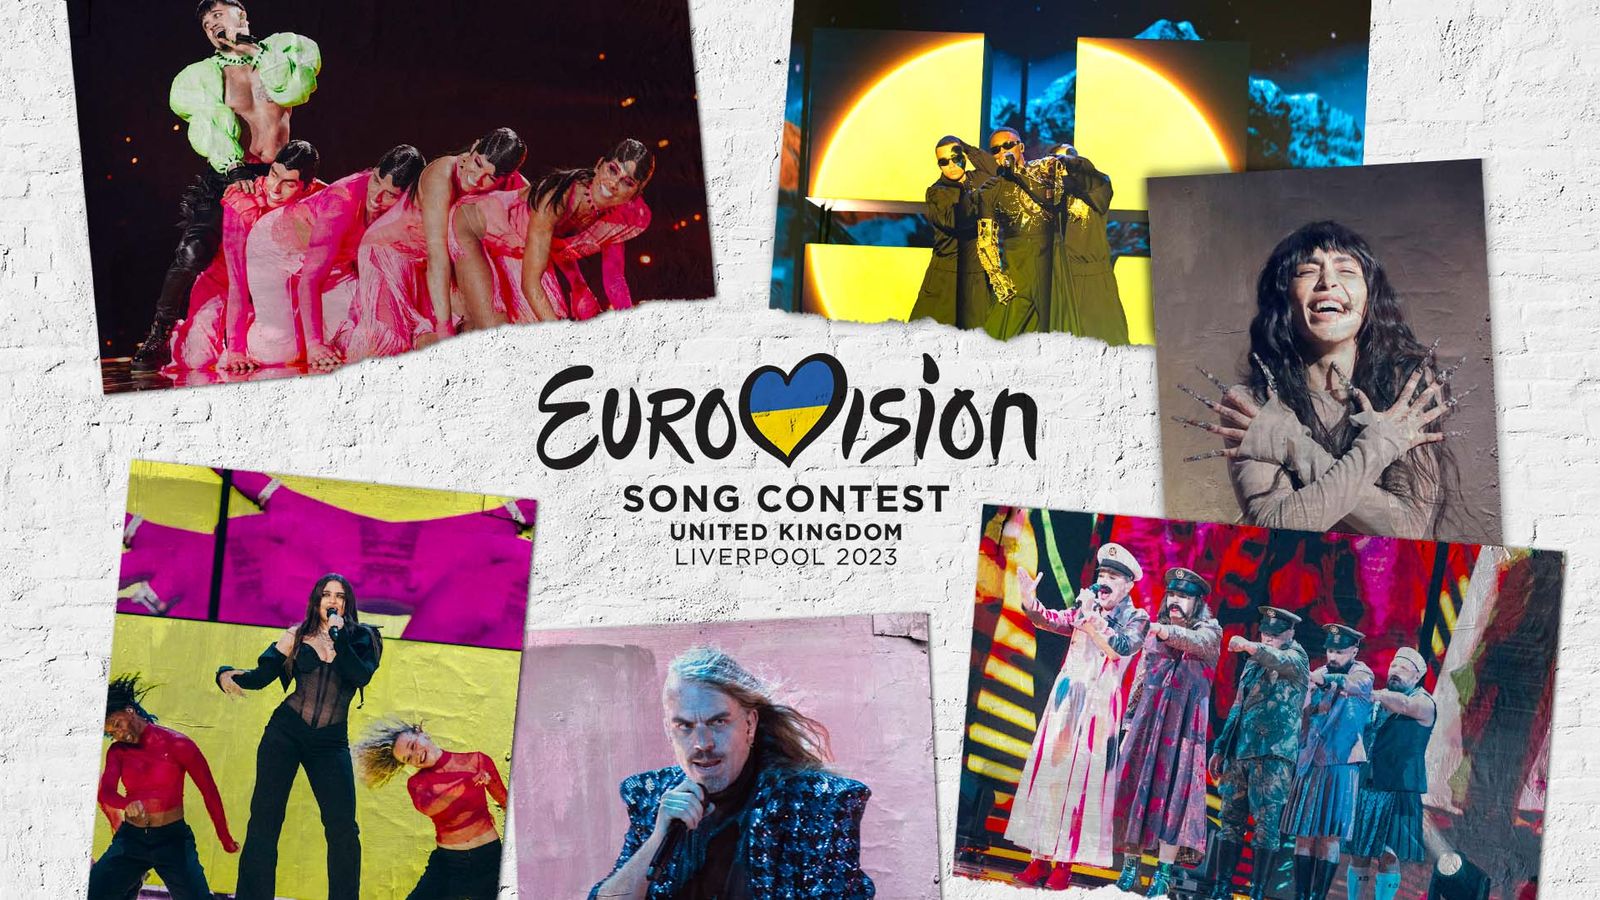 Eurovision week gets under way in Liverpool - here's everything you need to know about the contest watched by 160 million people